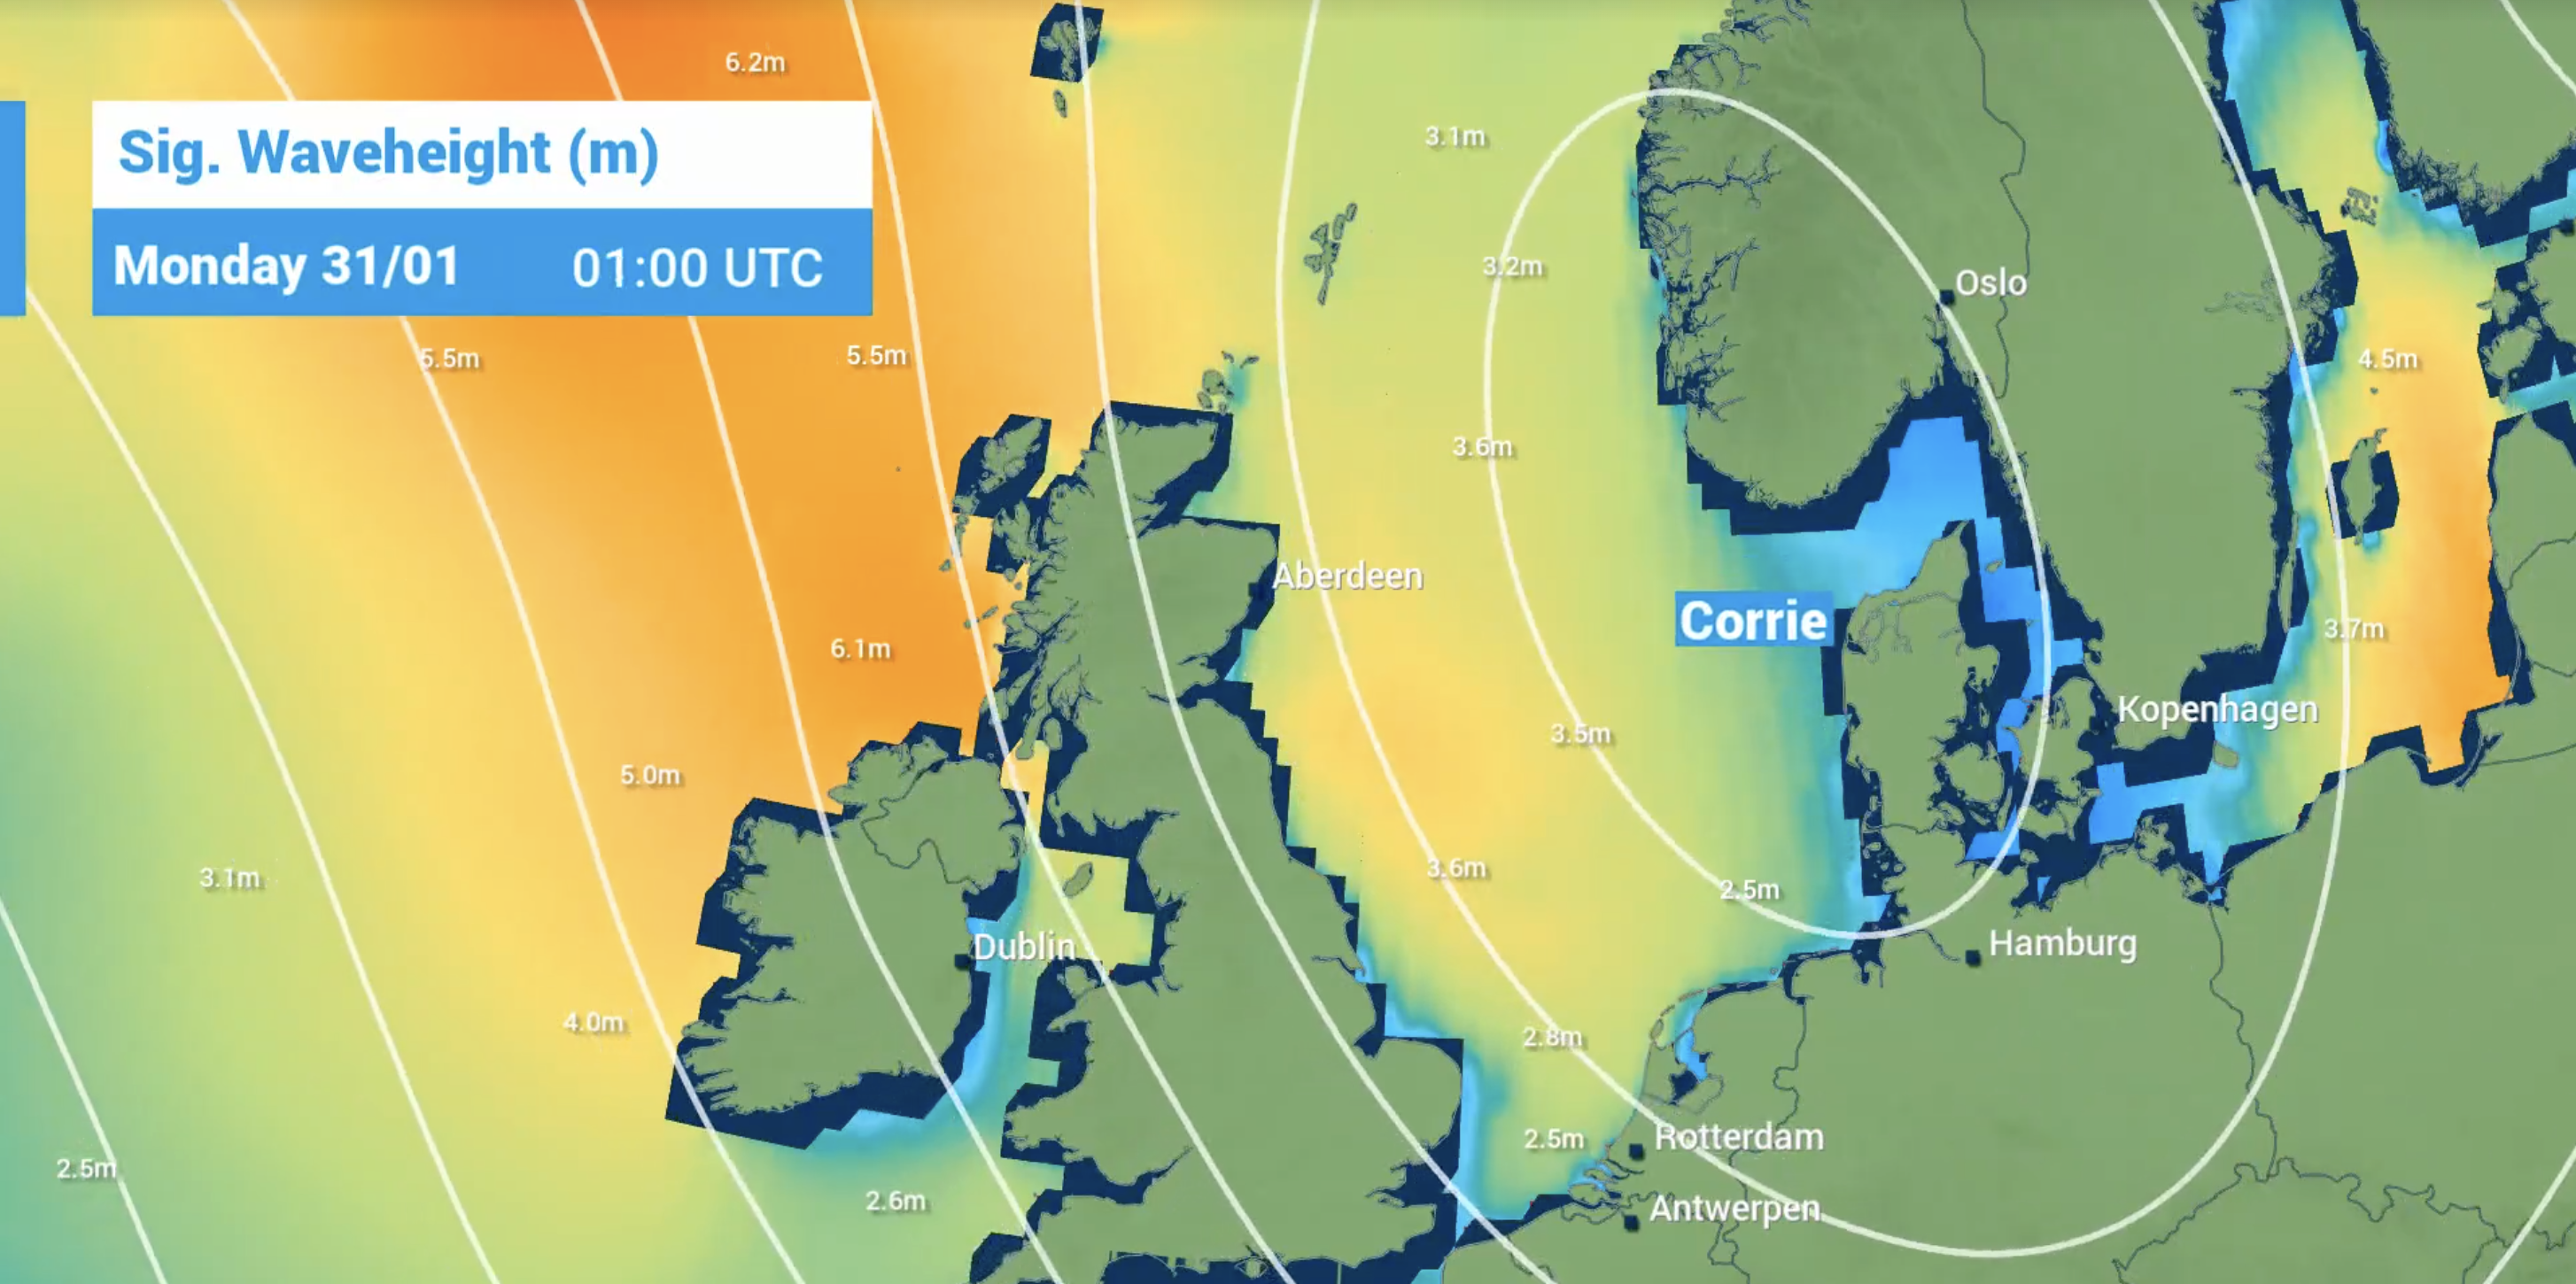 Storm Corrie will cause blustery weather over large part of the North Sea